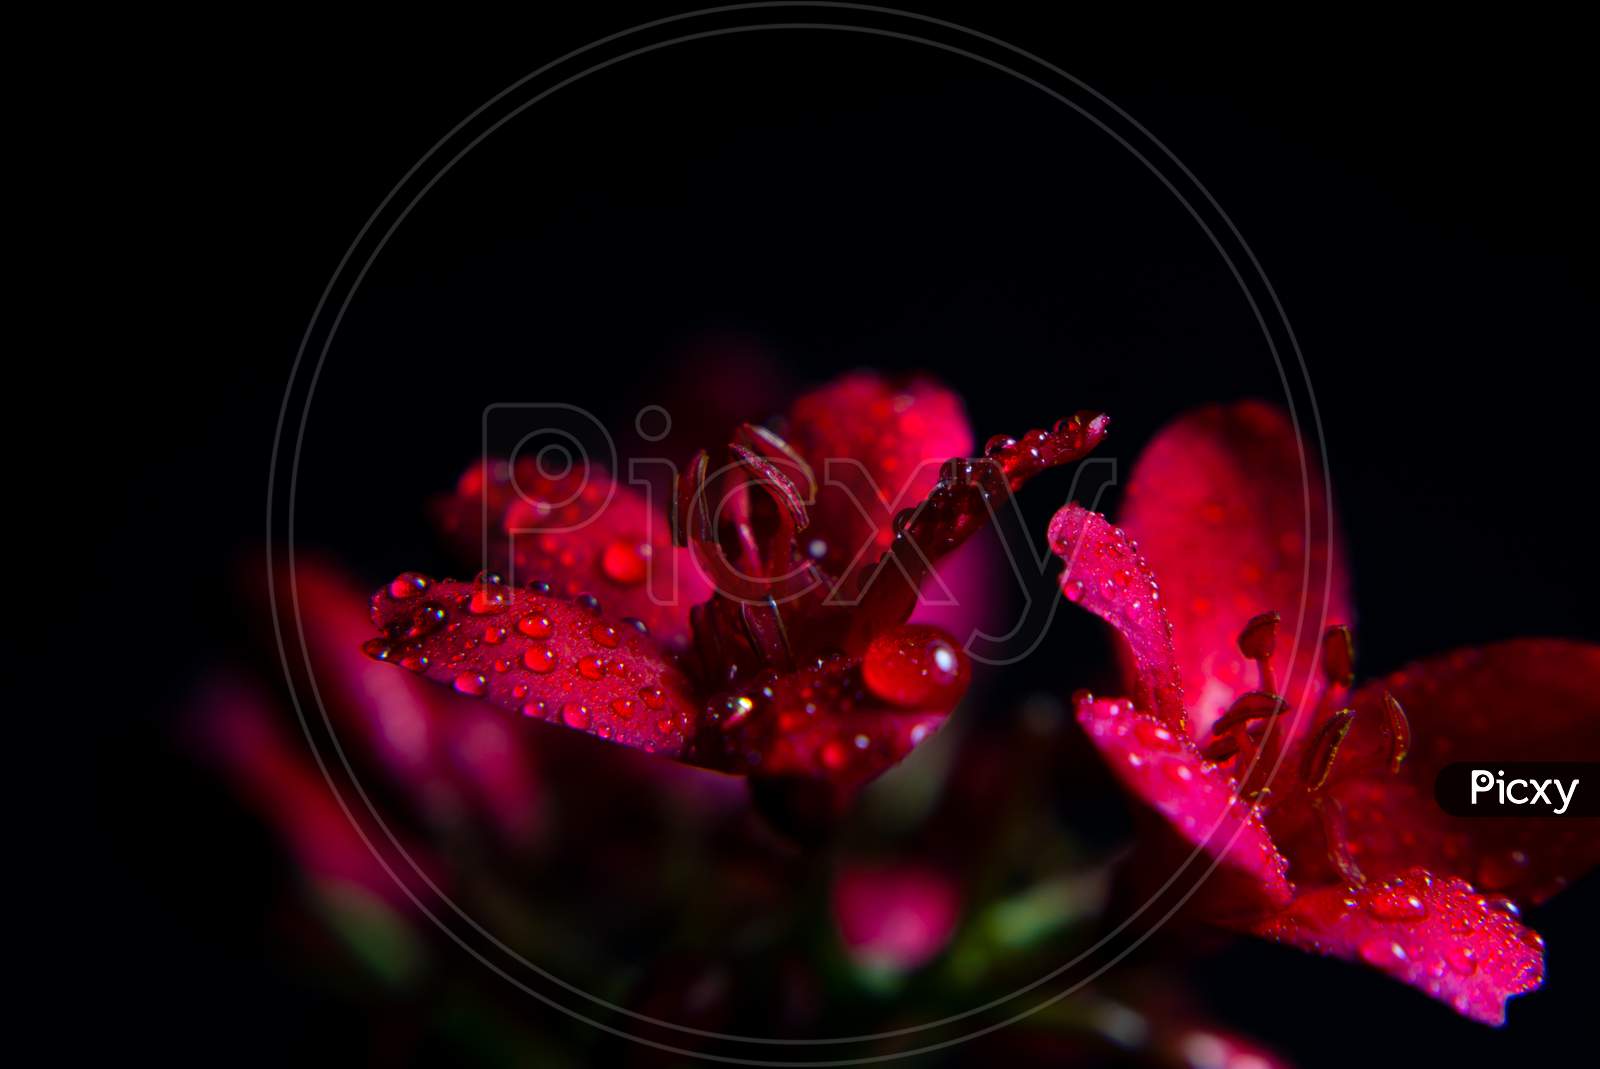 Red Flower with beautiful water droplets